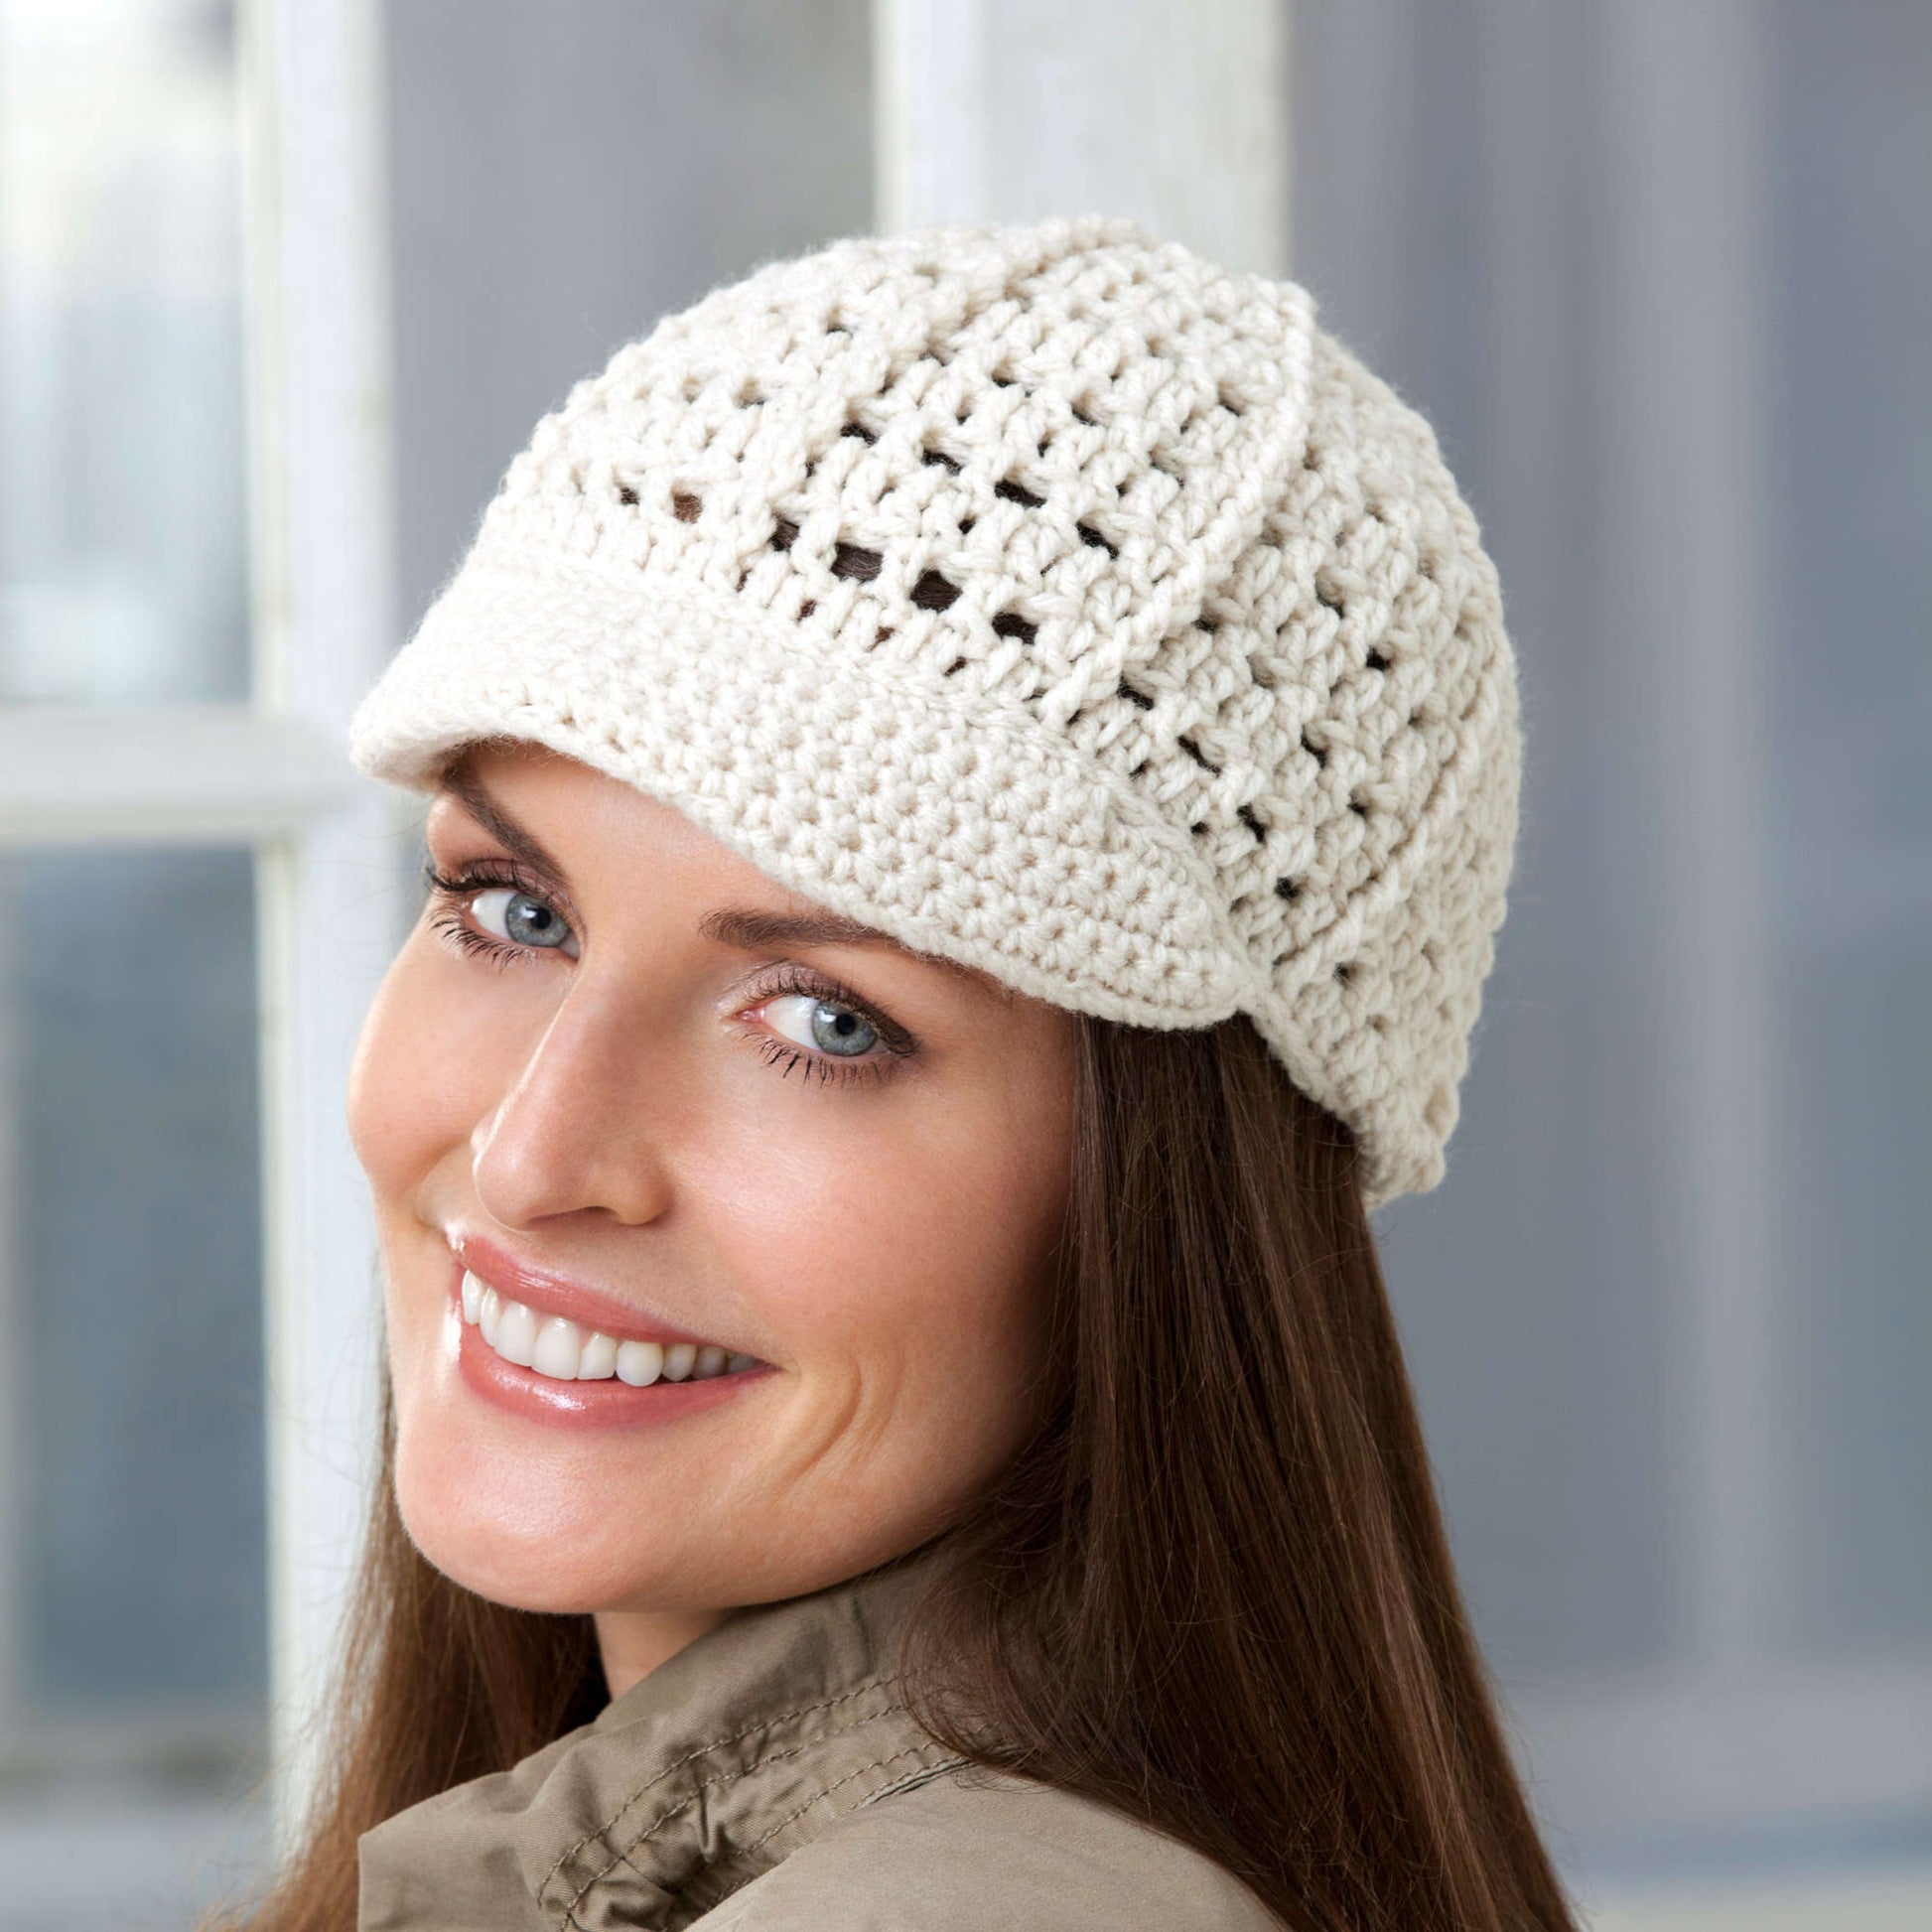 Free Red Heart Brimming With Fun Cap Crochet Pattern